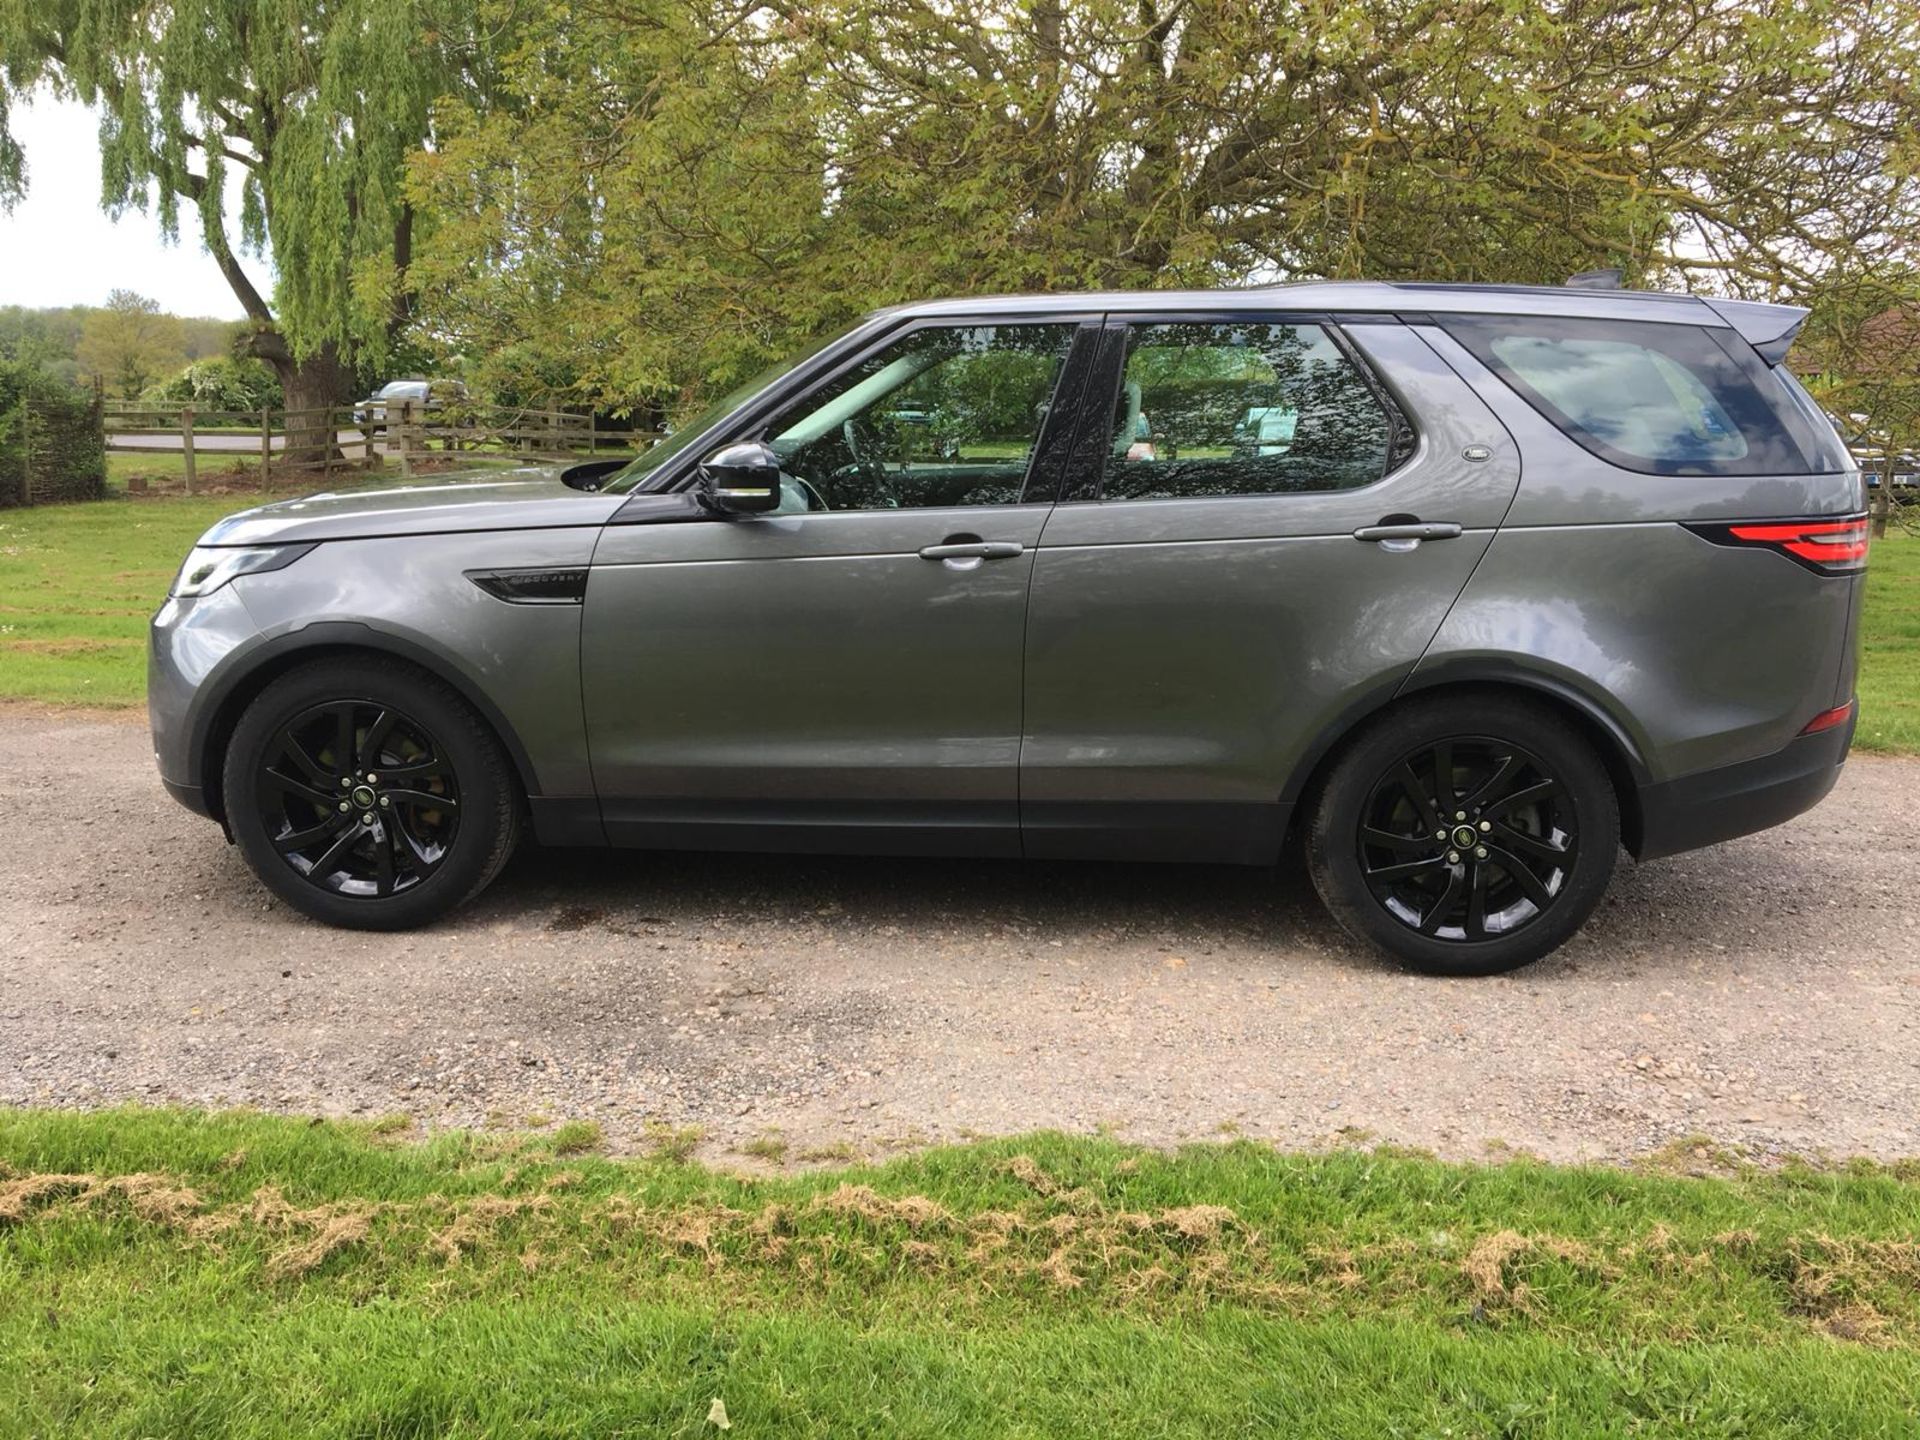 2017 REG LANDROVER DISCOVERY 5 TD6 HSE AUTO 2017 NEW SHAPE - Image 4 of 17